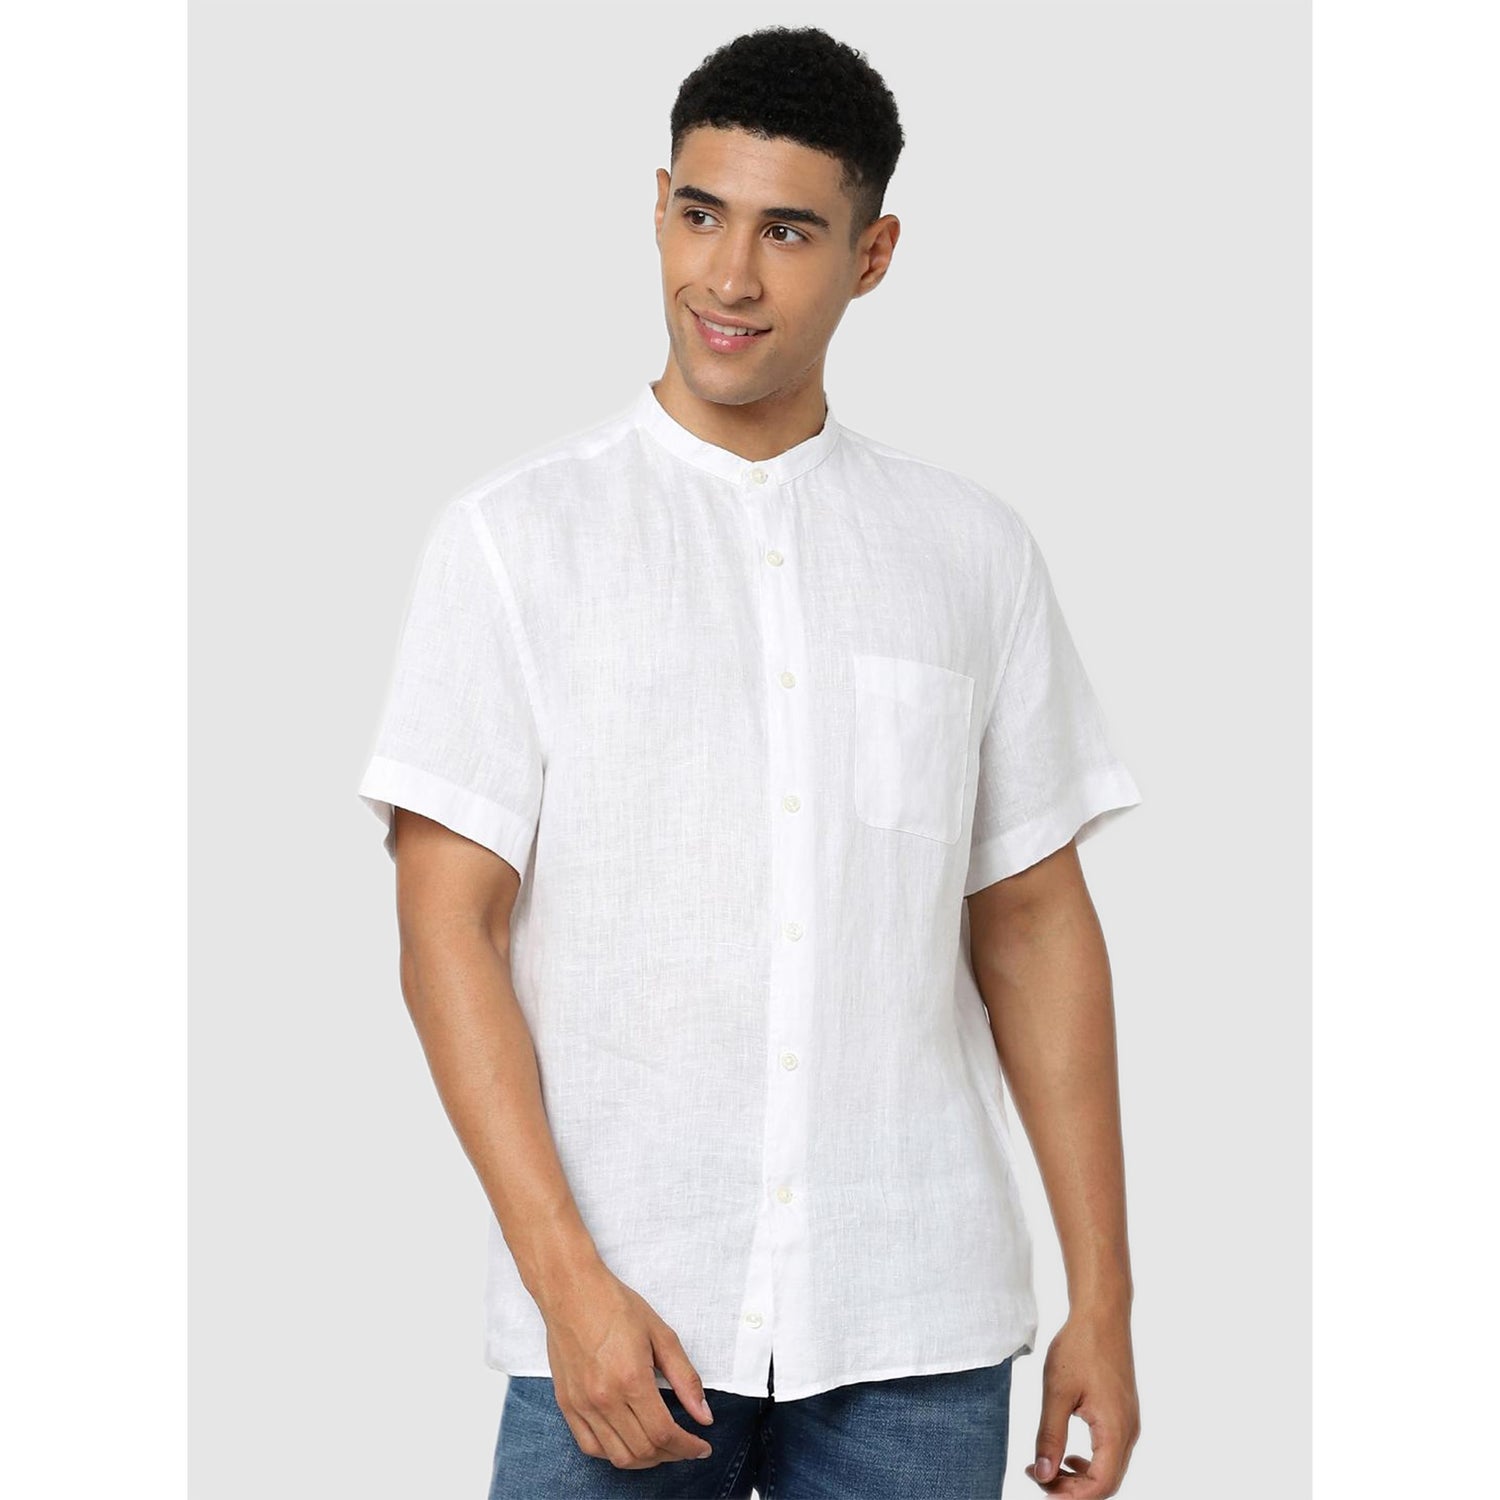 White Solid Regular Fit Classic Casual Shirt (BAMAOPOC)